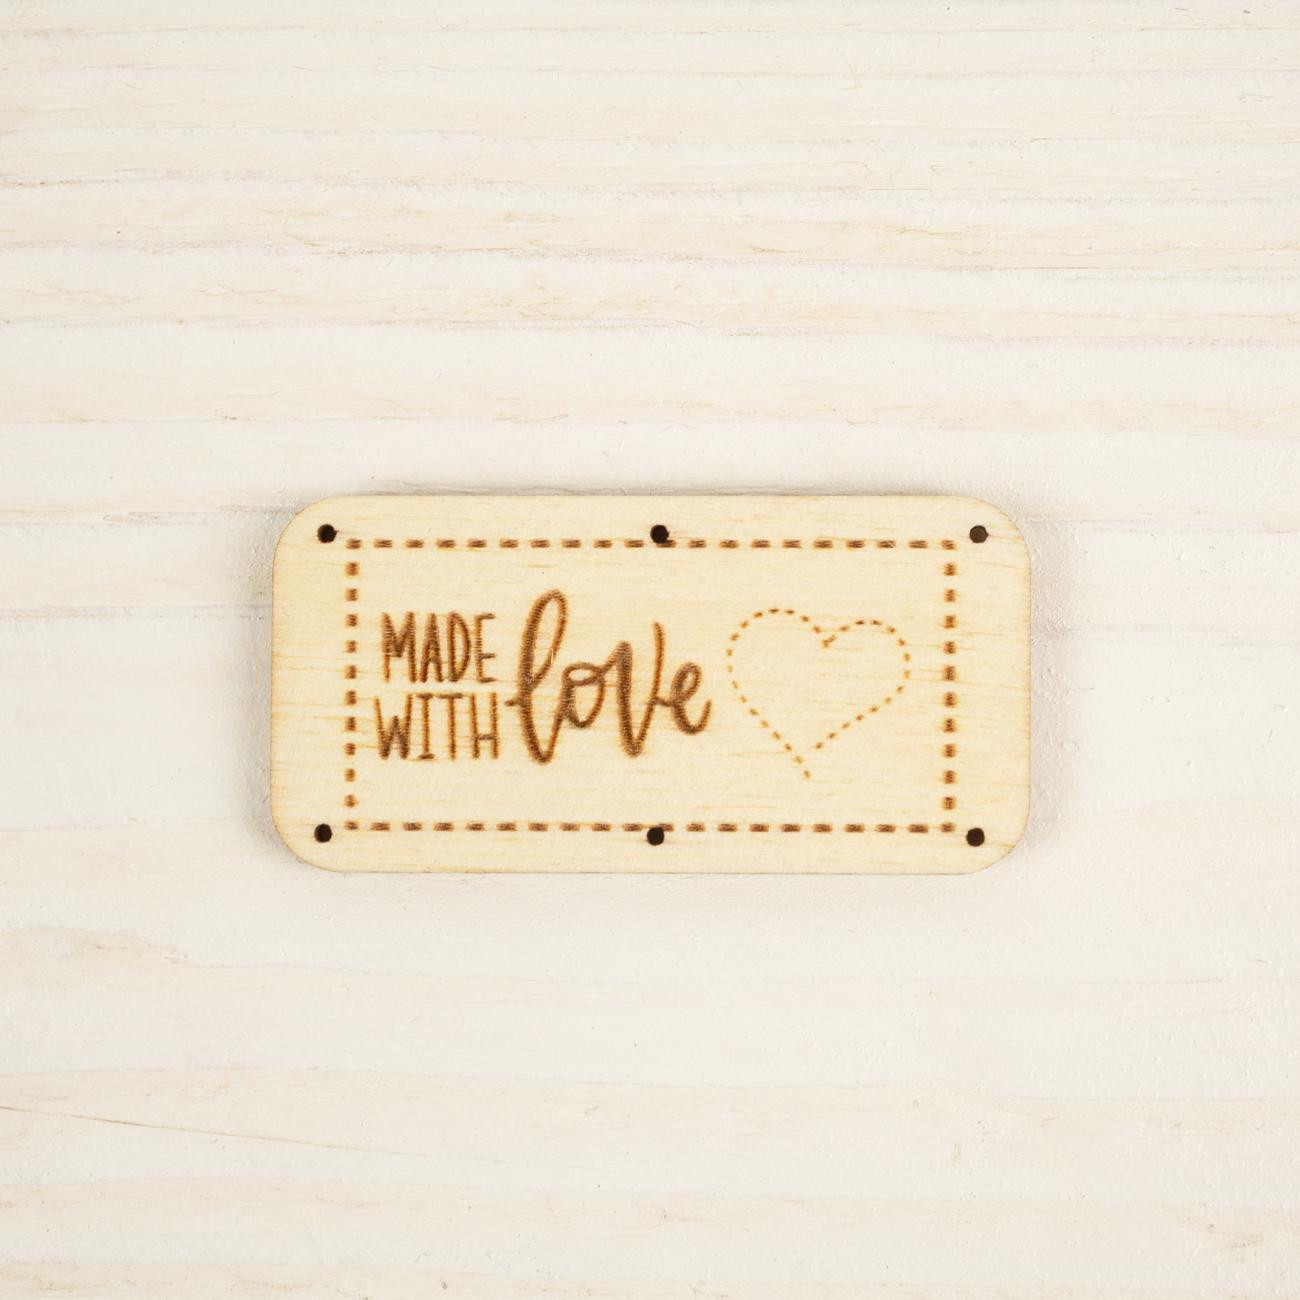 Wooden label rectangular - MADE WITH LOVE / PAT. 3